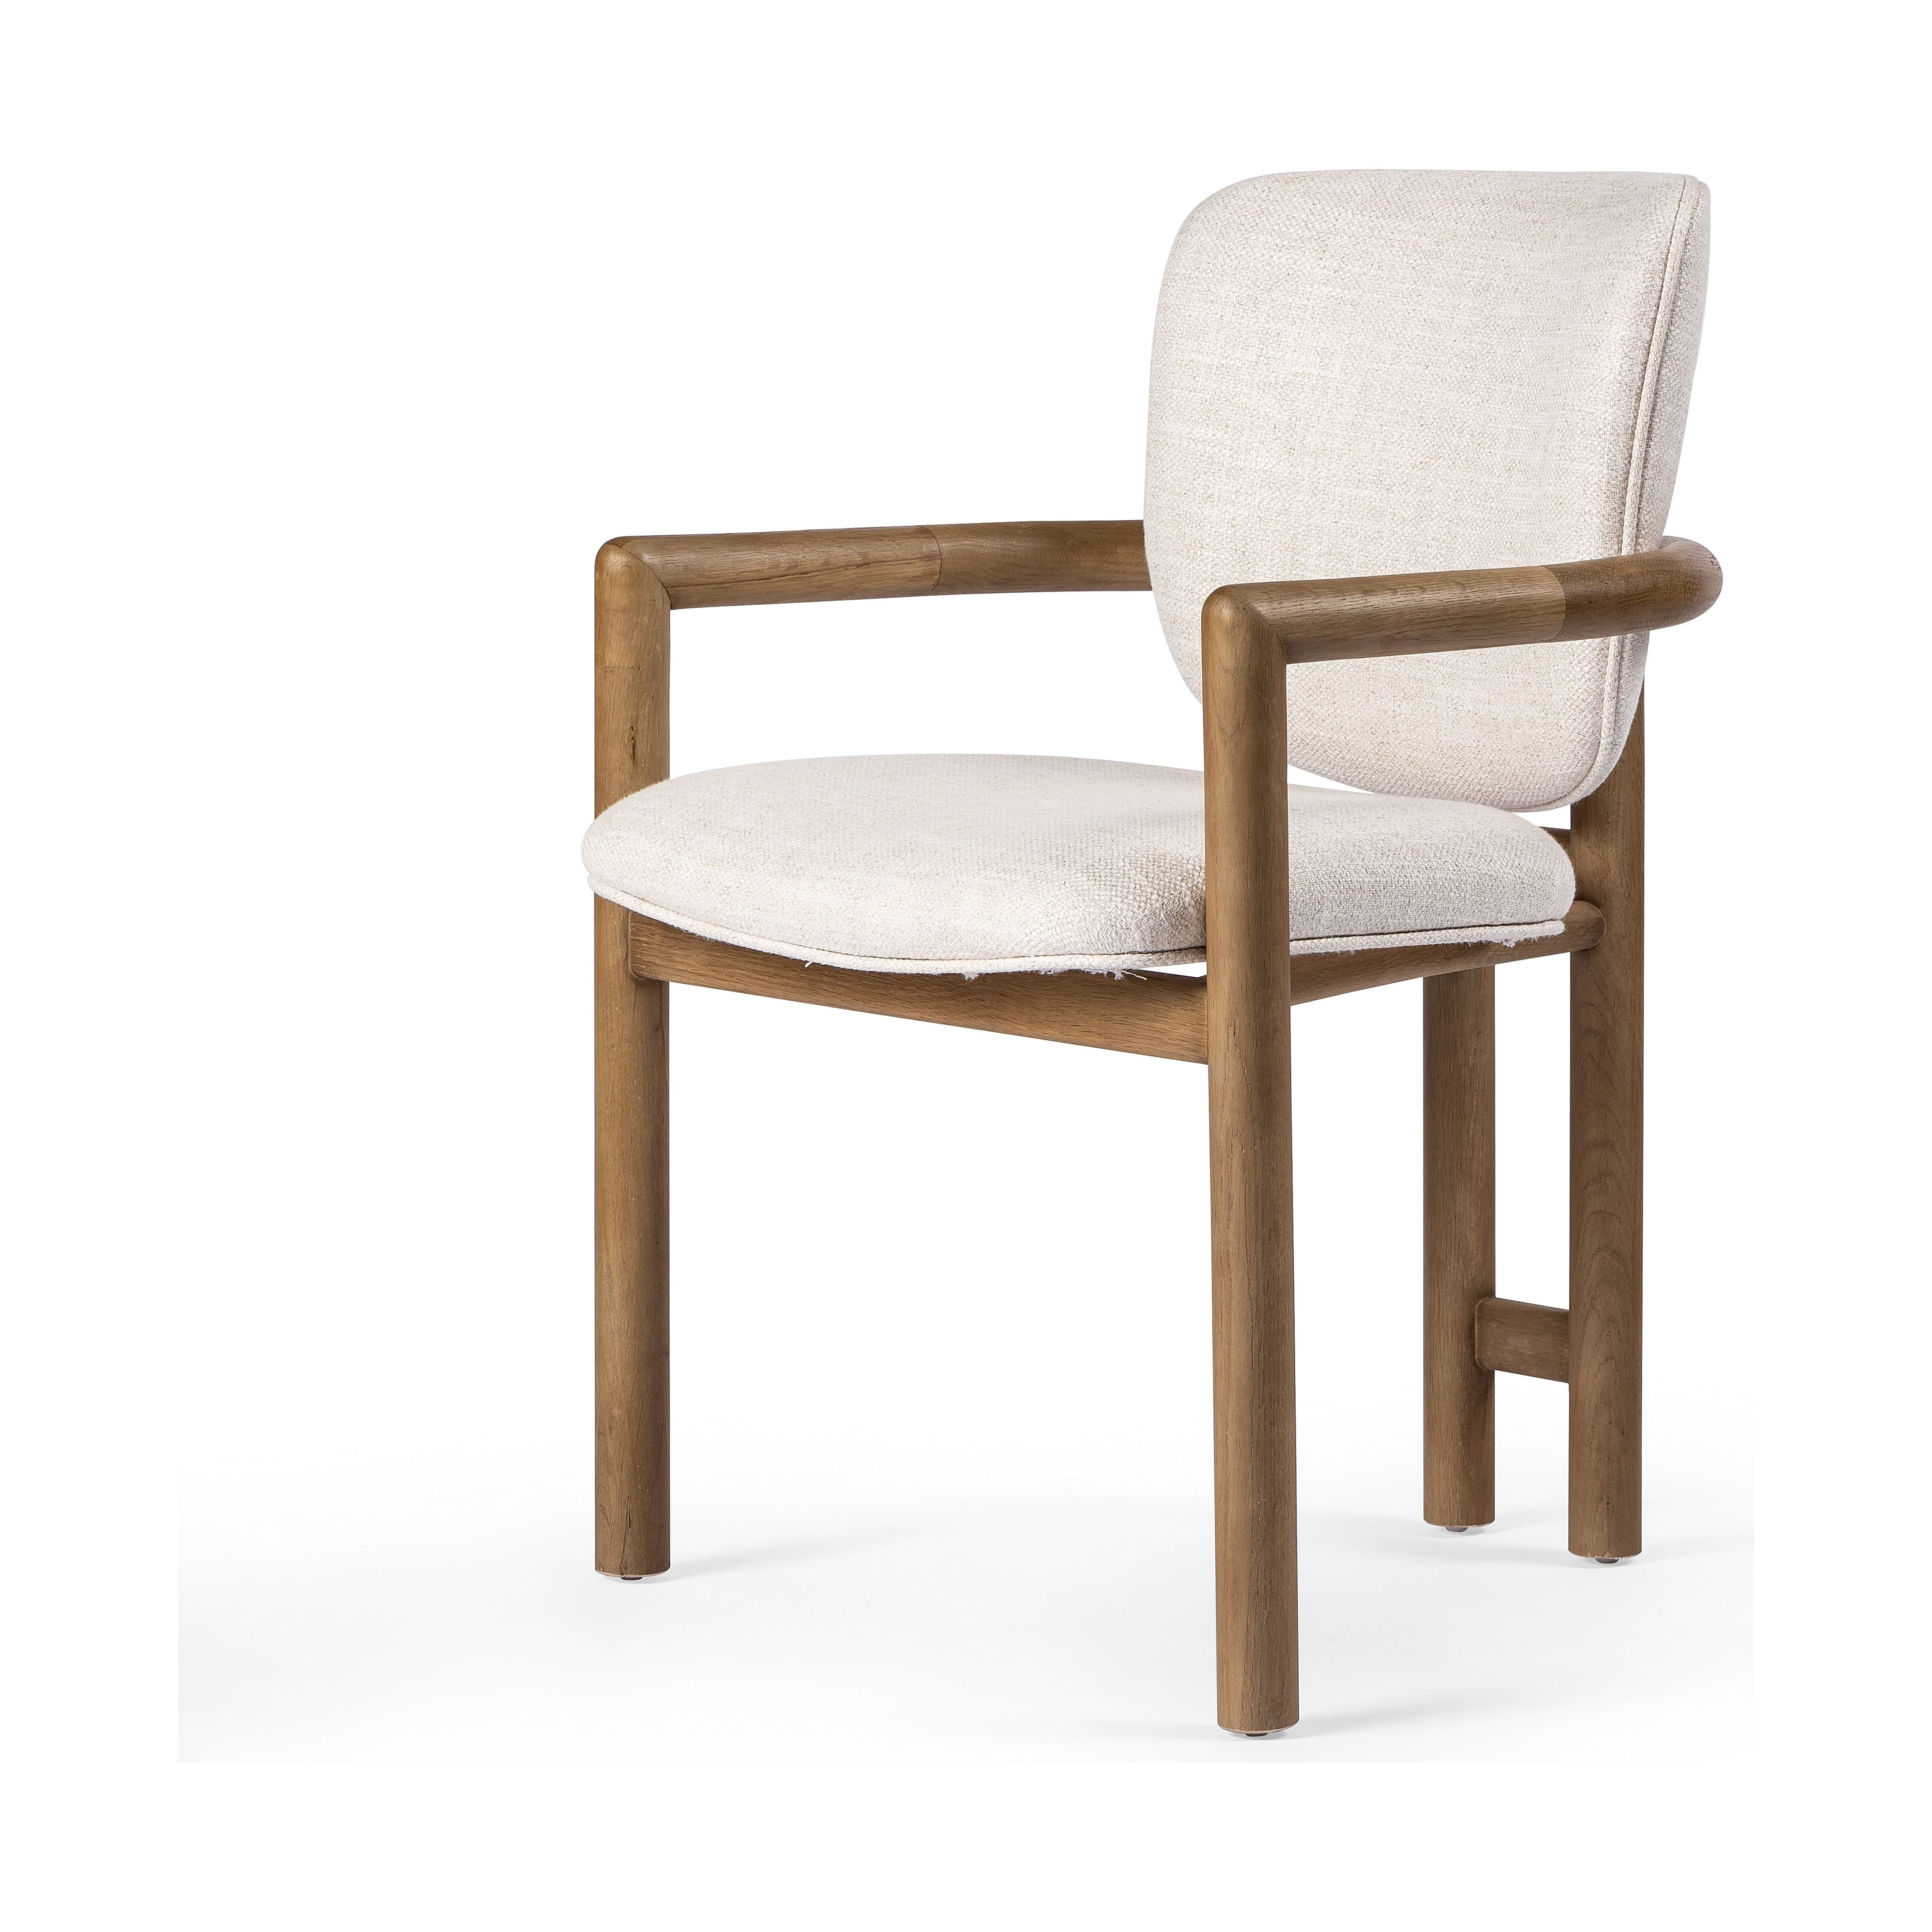 A three-leg format dining chair, streamlining a traditional shape with a touch of intrigue. Tubular framework pairs with curves and a barrel back, bringing a softness to the overall look and design. Amethyst Home provides interior design, new construction, custom furniture, and area rugs in the San Diego metro area.